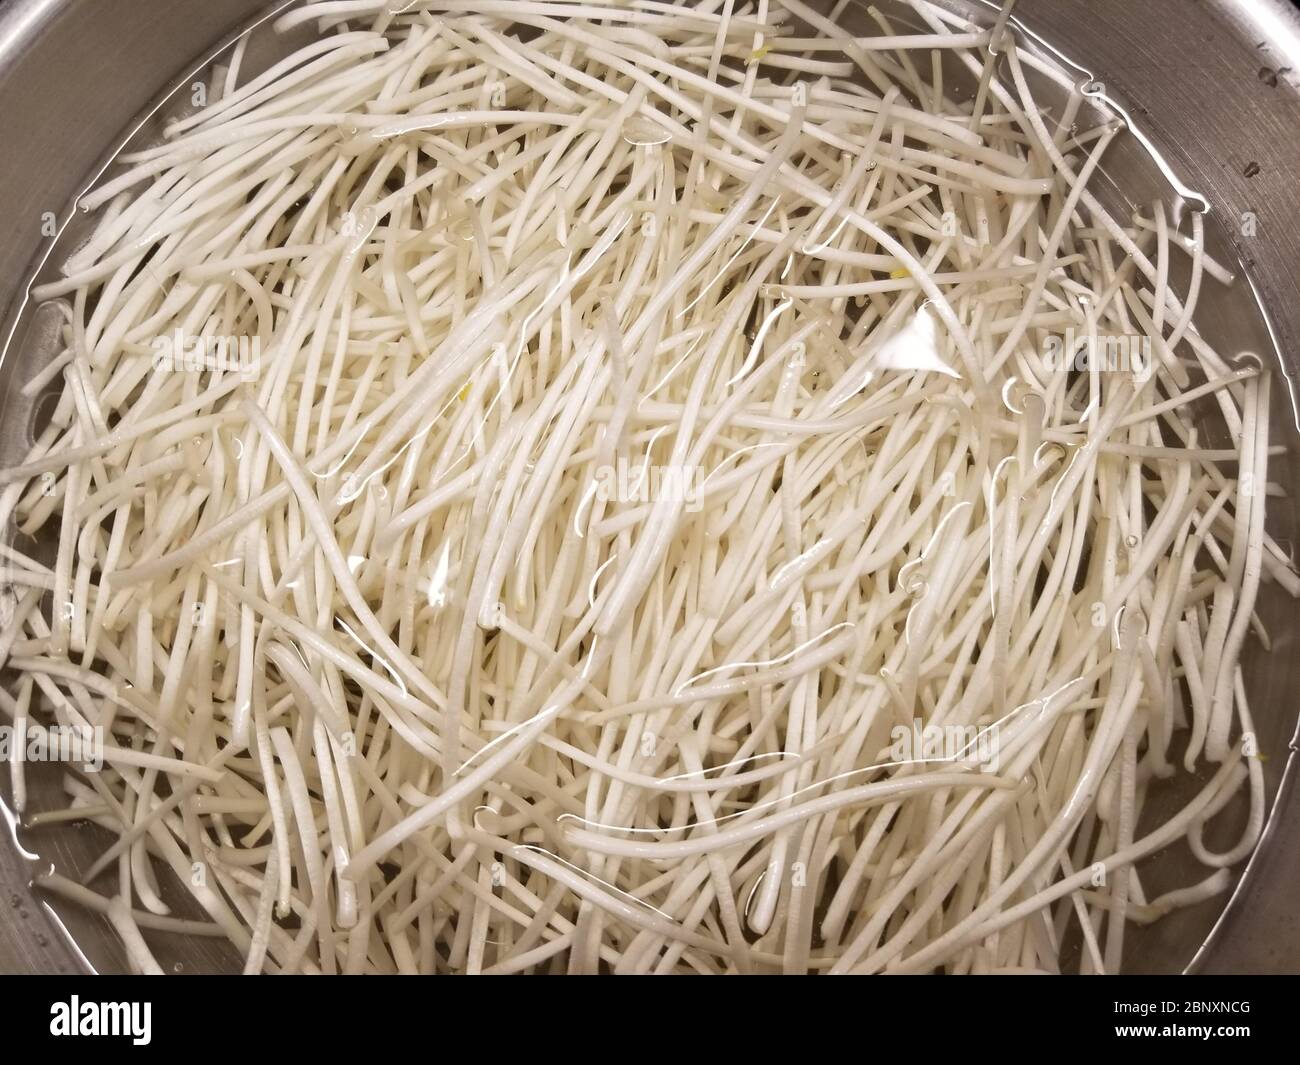 Trimmed of the spent seed head and small thin roots, bean sprouts are cleaned in fresh water Stock Photo